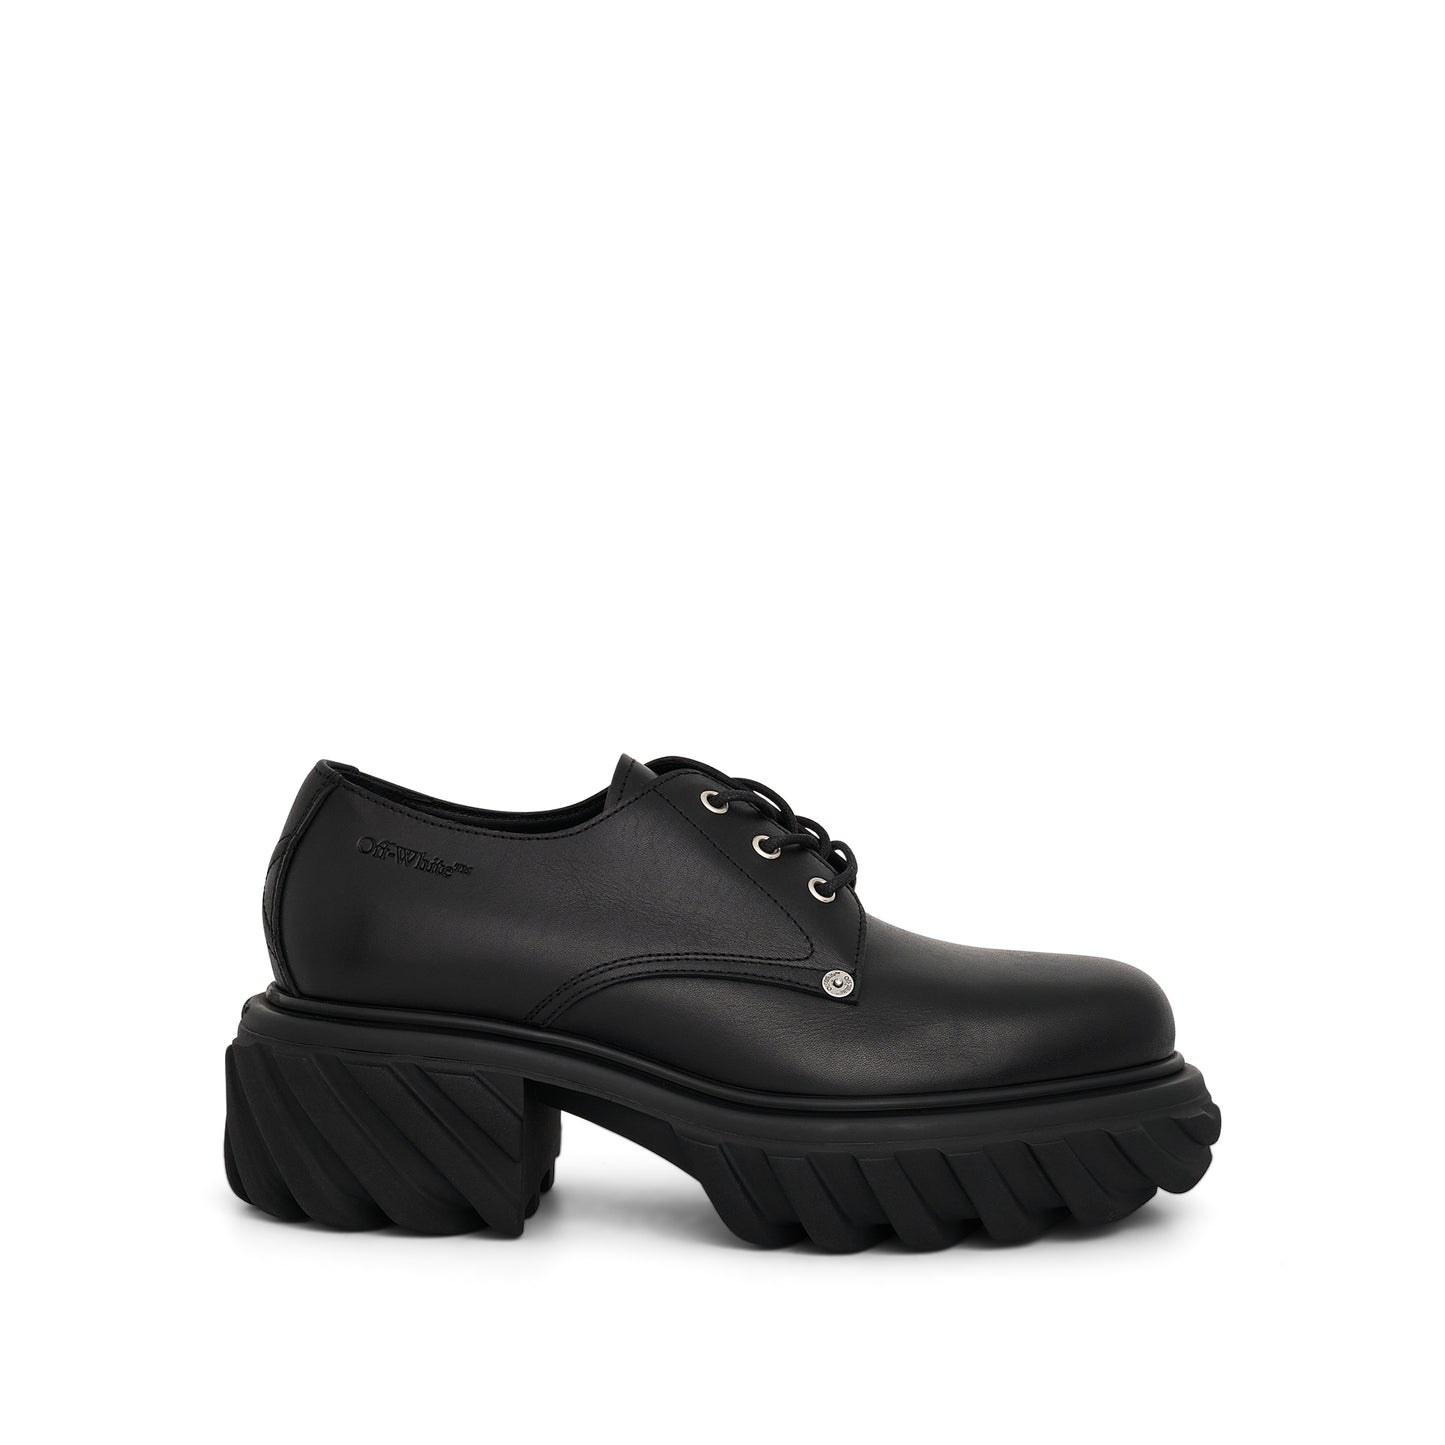 Exploration Derby Shoes in Black